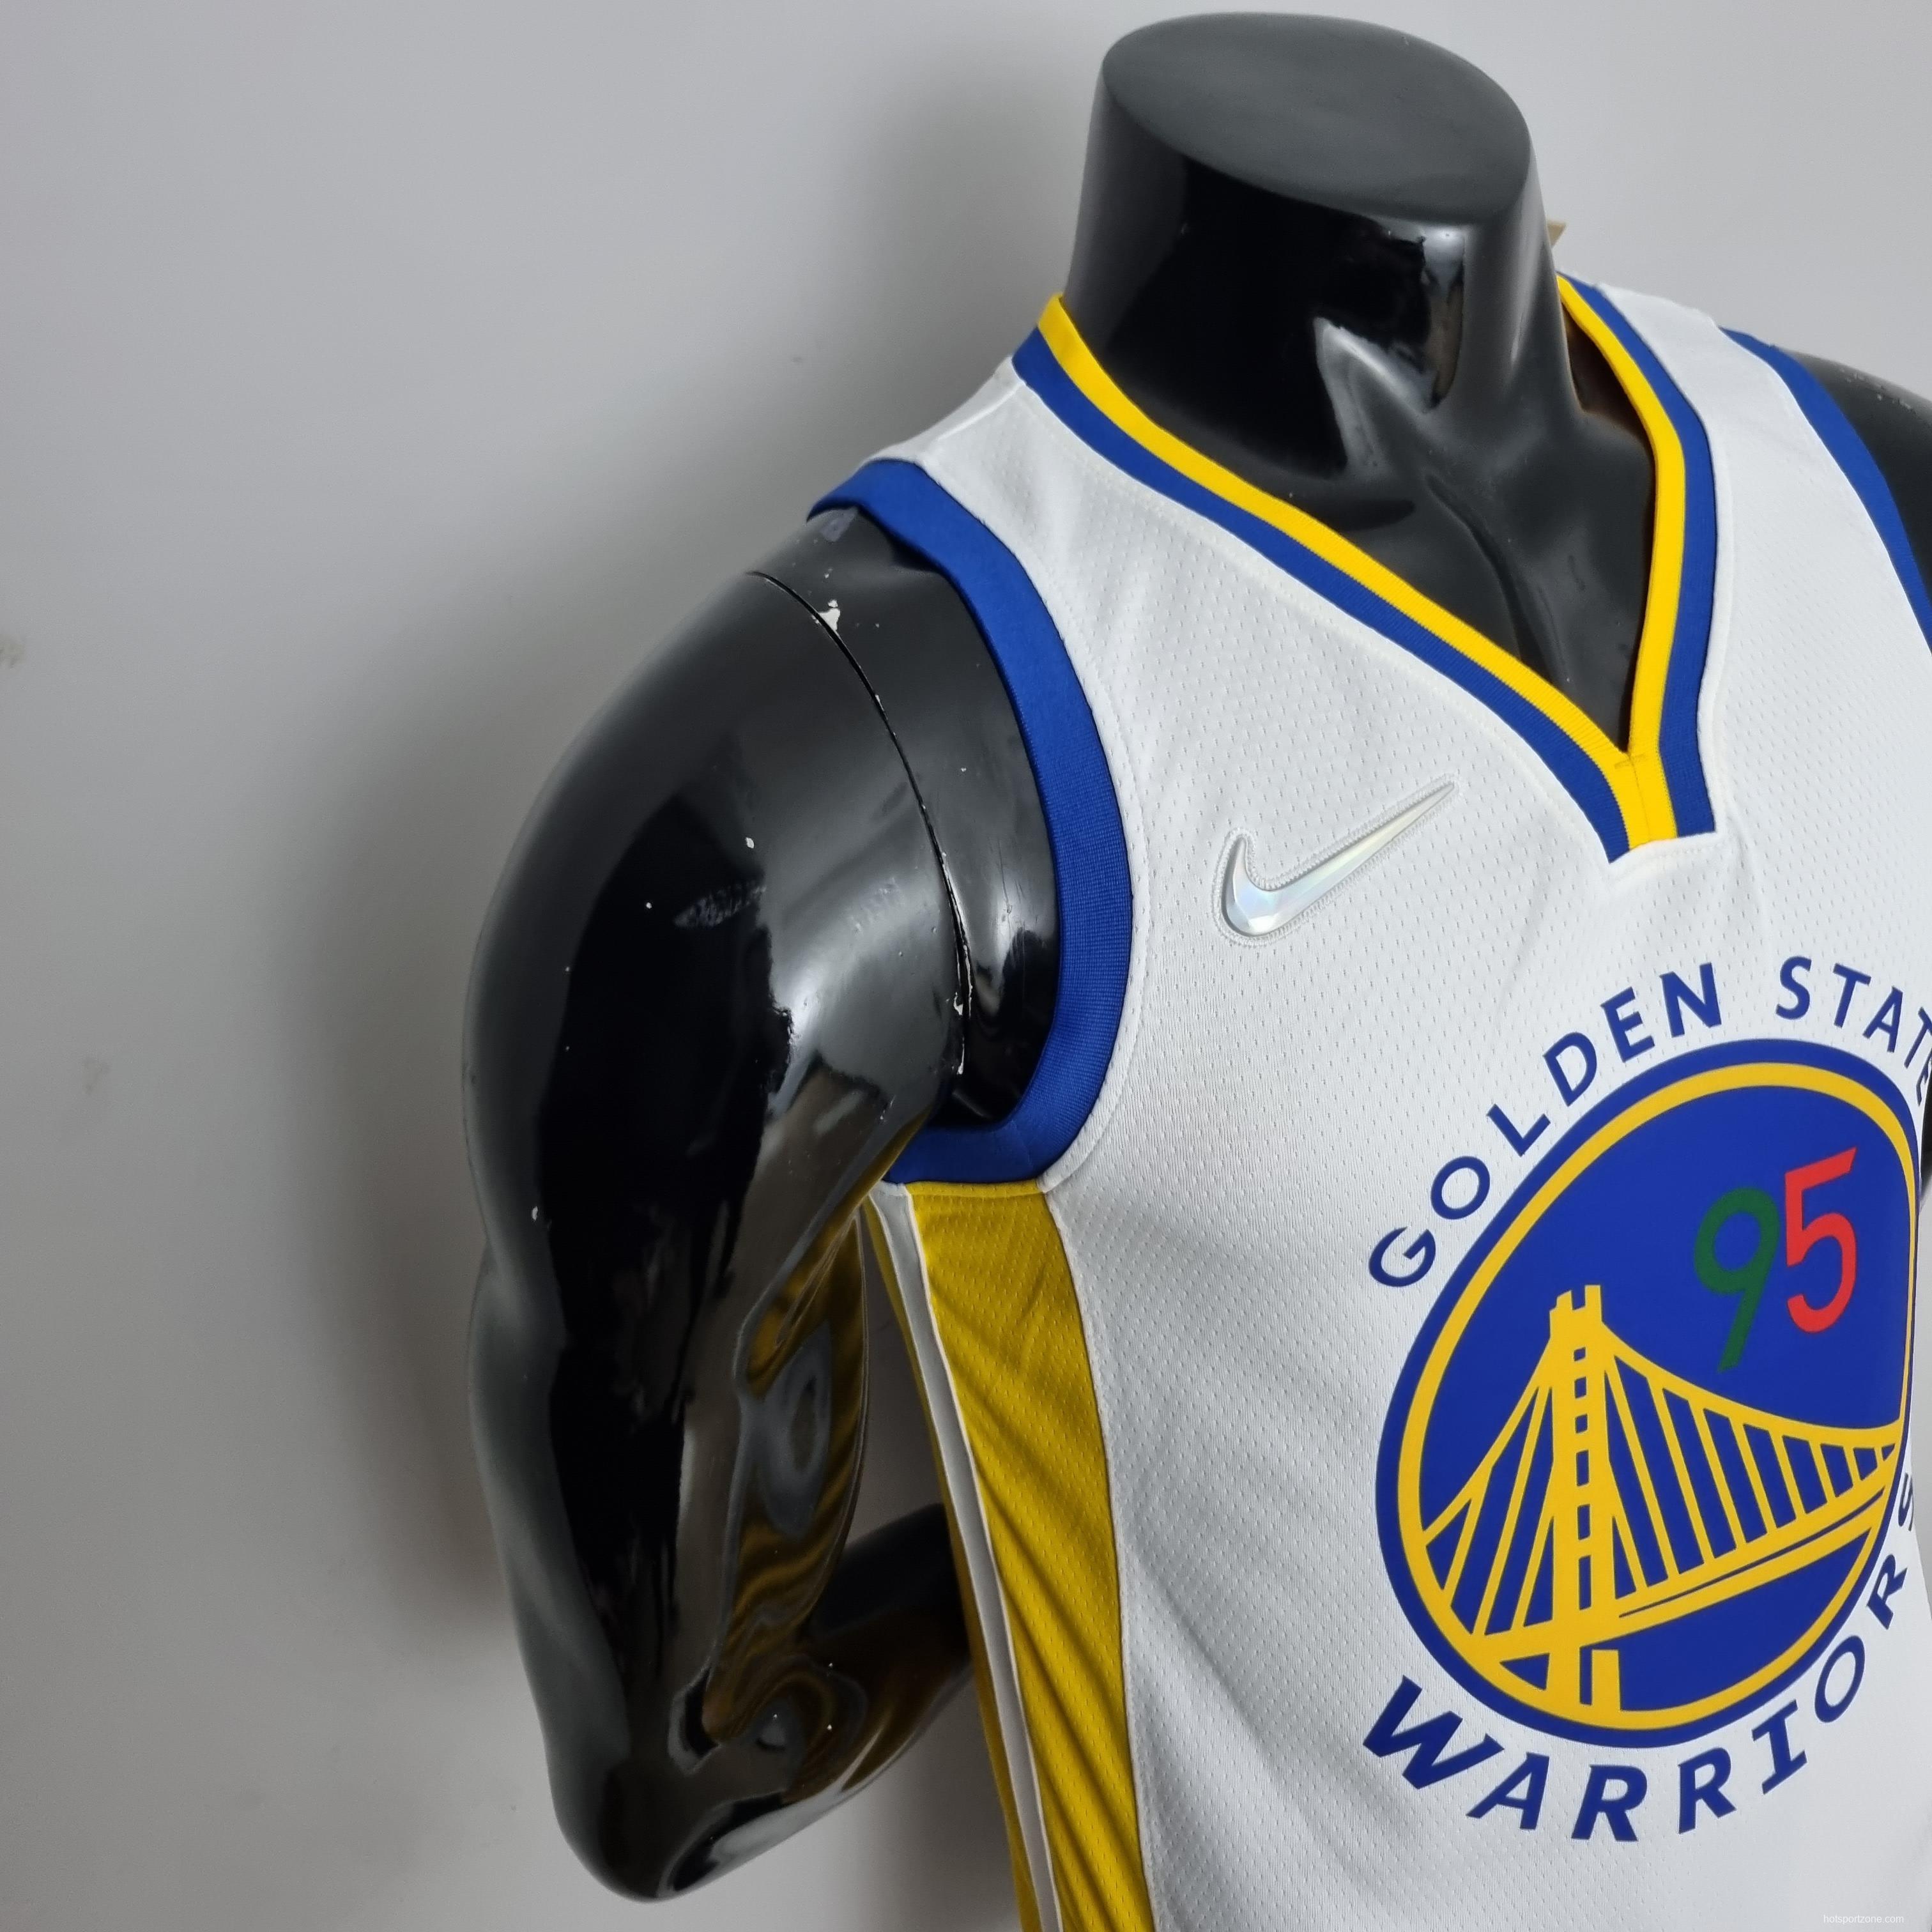 75th Anniversary Toscano#95 Golden State Warriors Mexico Exclusive White NBA Jersey